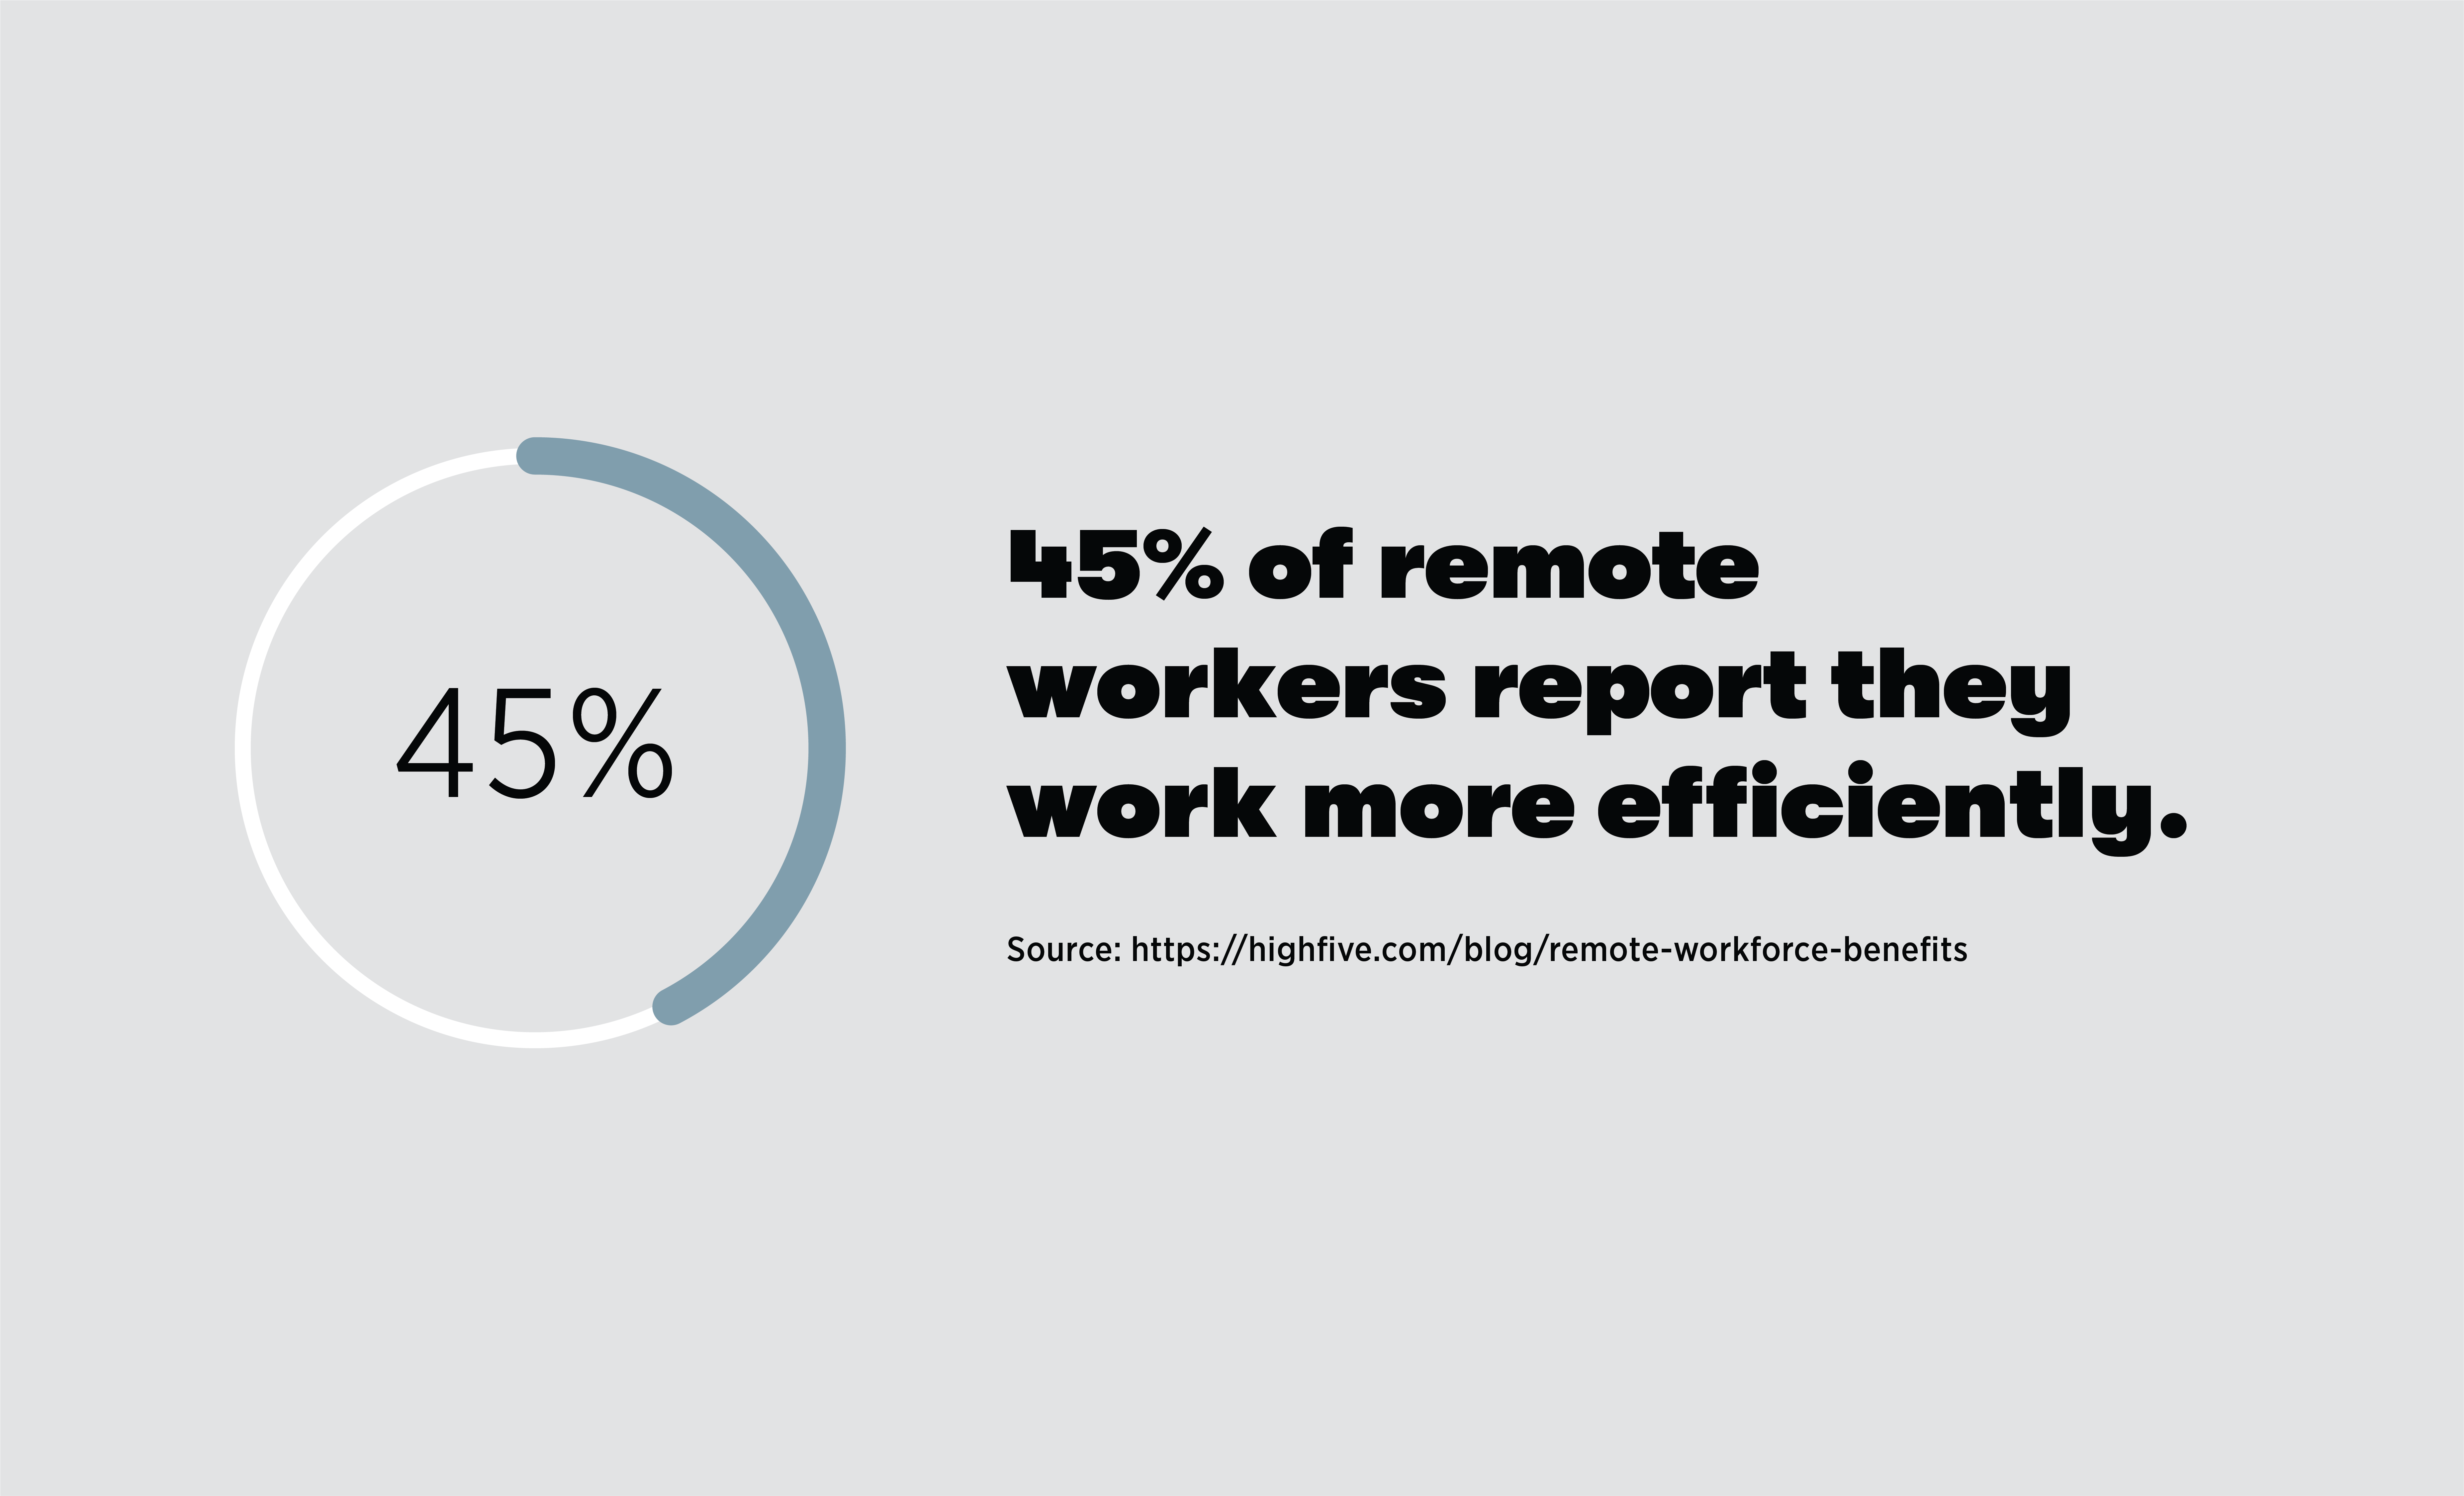 45% of remote workers reported they work more efficiently